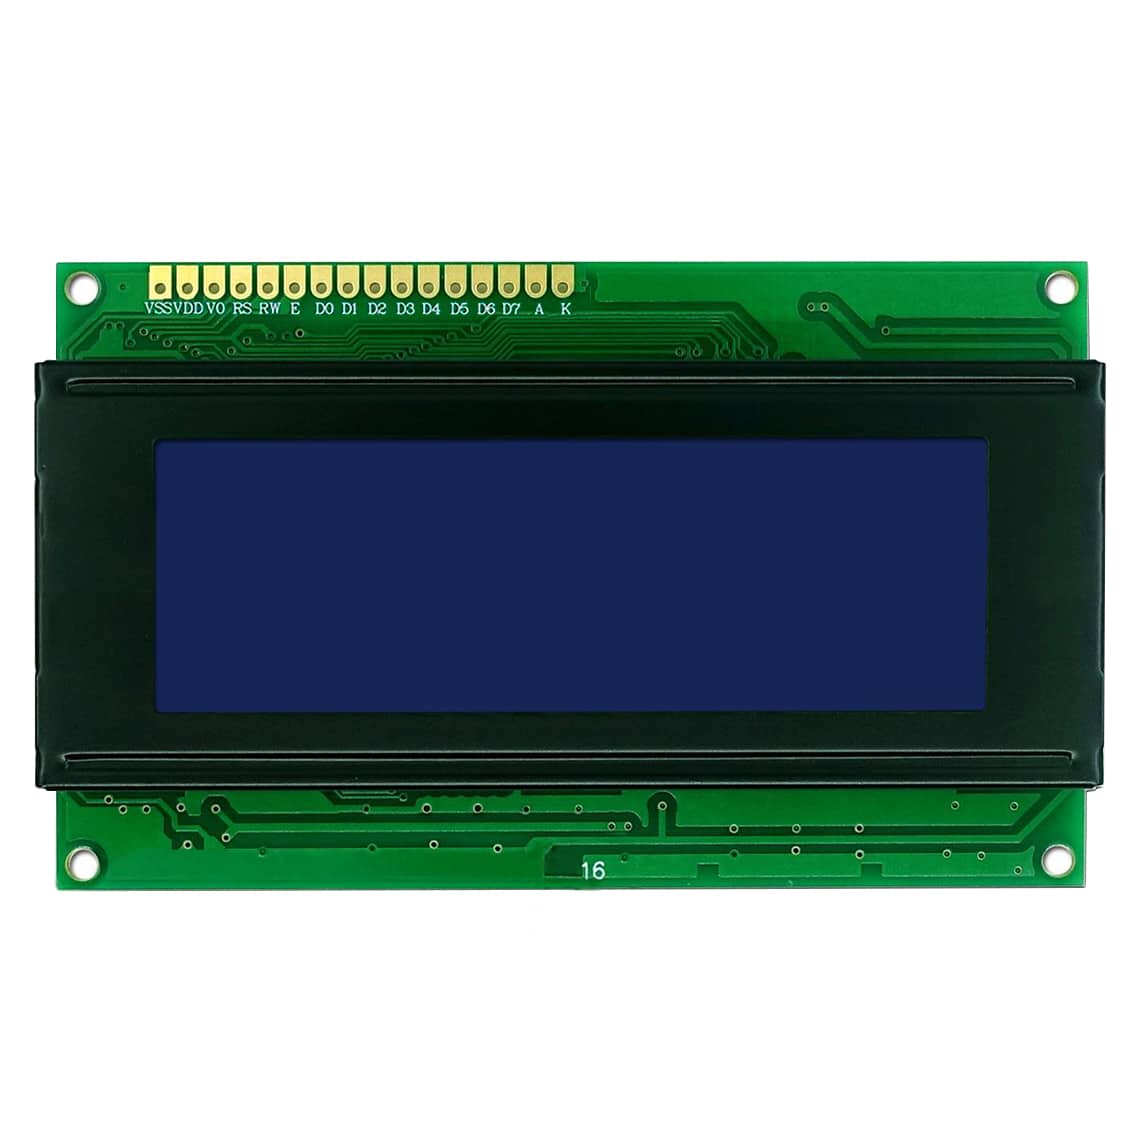 20x4 Character LCD Display Module with LED Backlight White on Blue